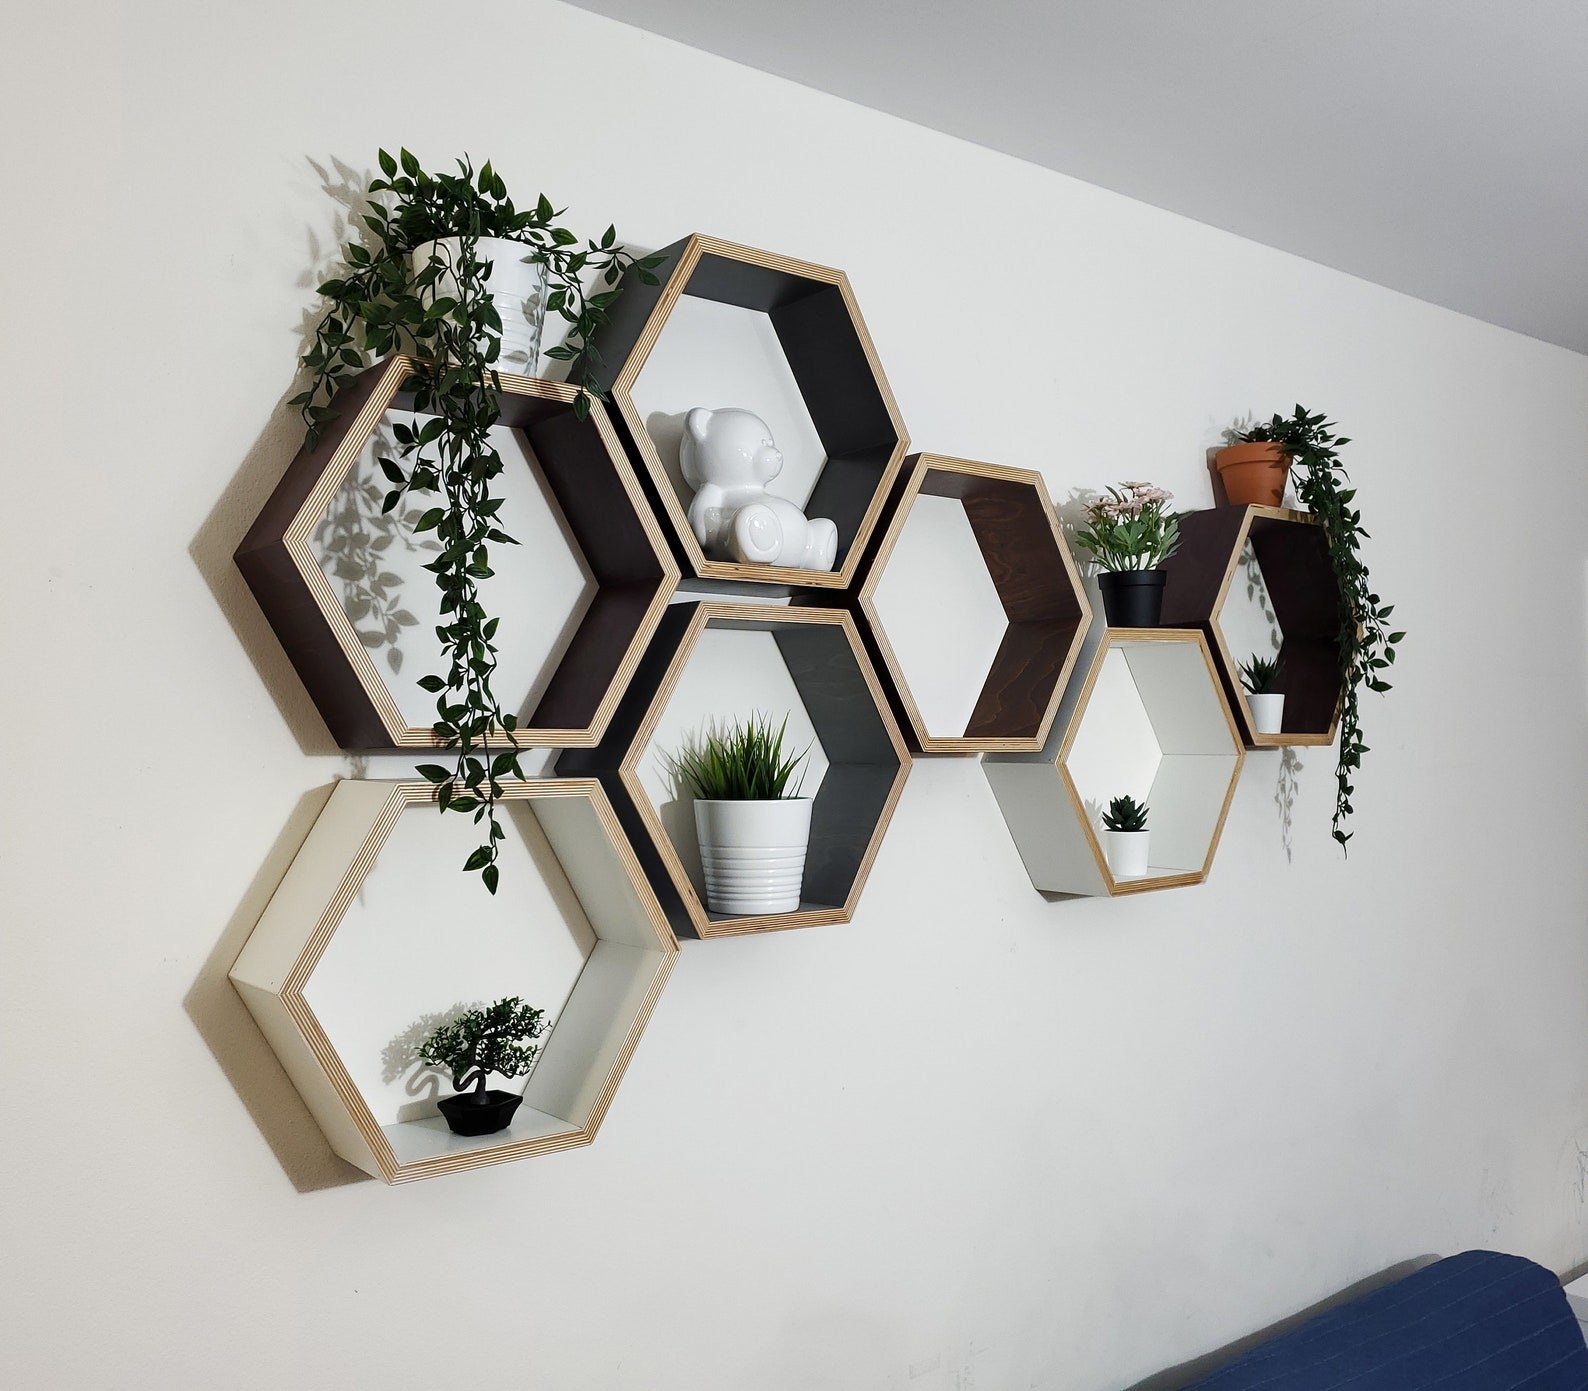 Seven hexagon shelves assembled in a honeycomb pattern on the wall holding plants and a decorative ceramic teddy bear